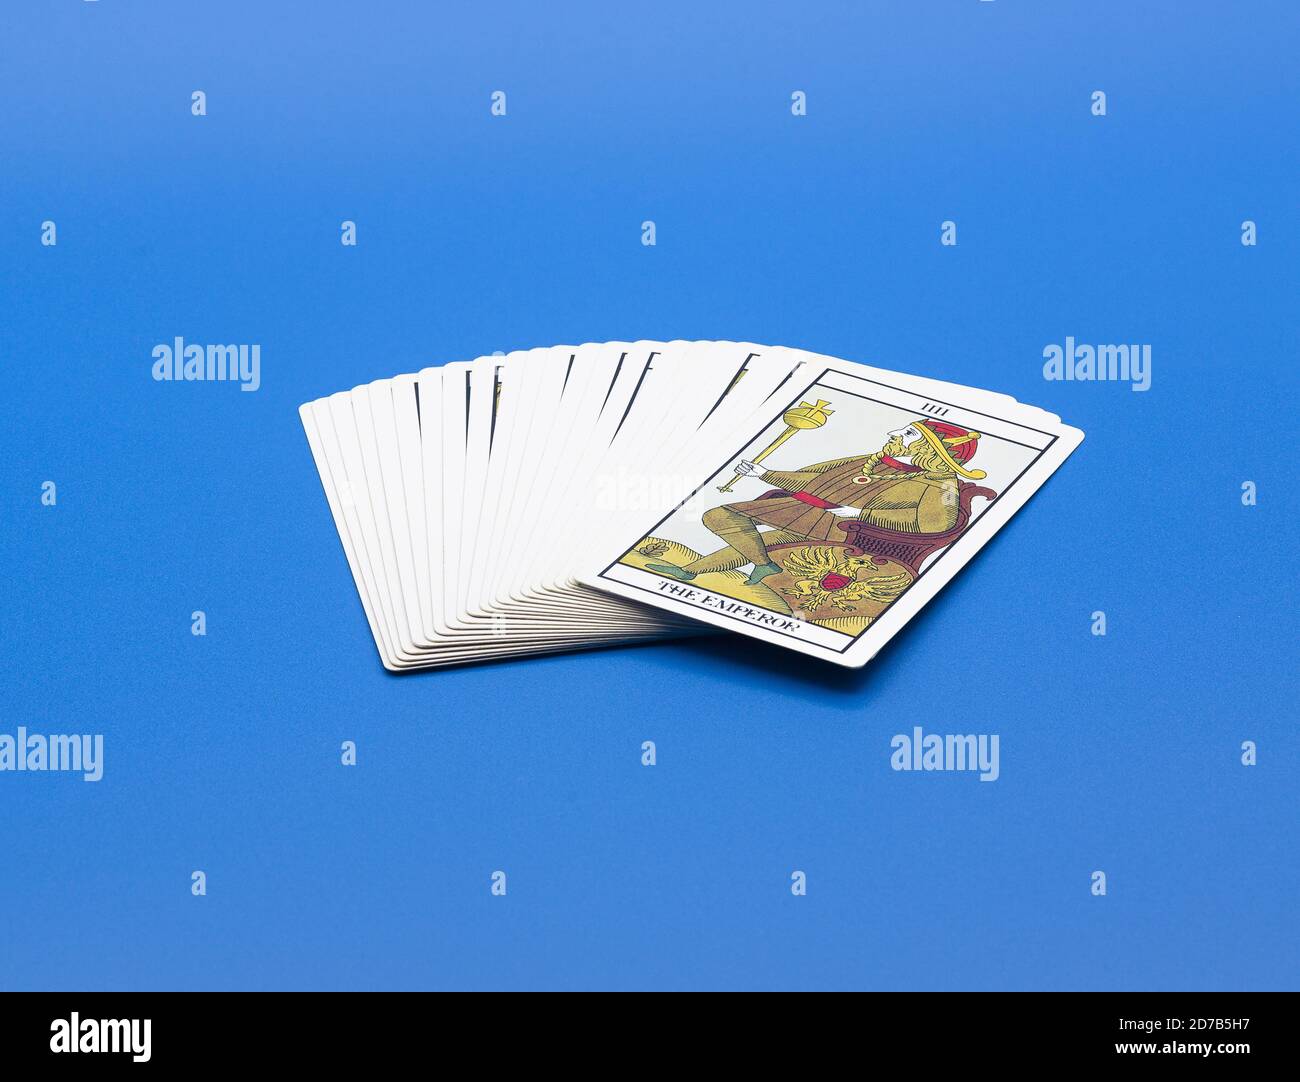 Pack of tarot cards with the Emperor card on the front isolated on a blue background Stock Photo